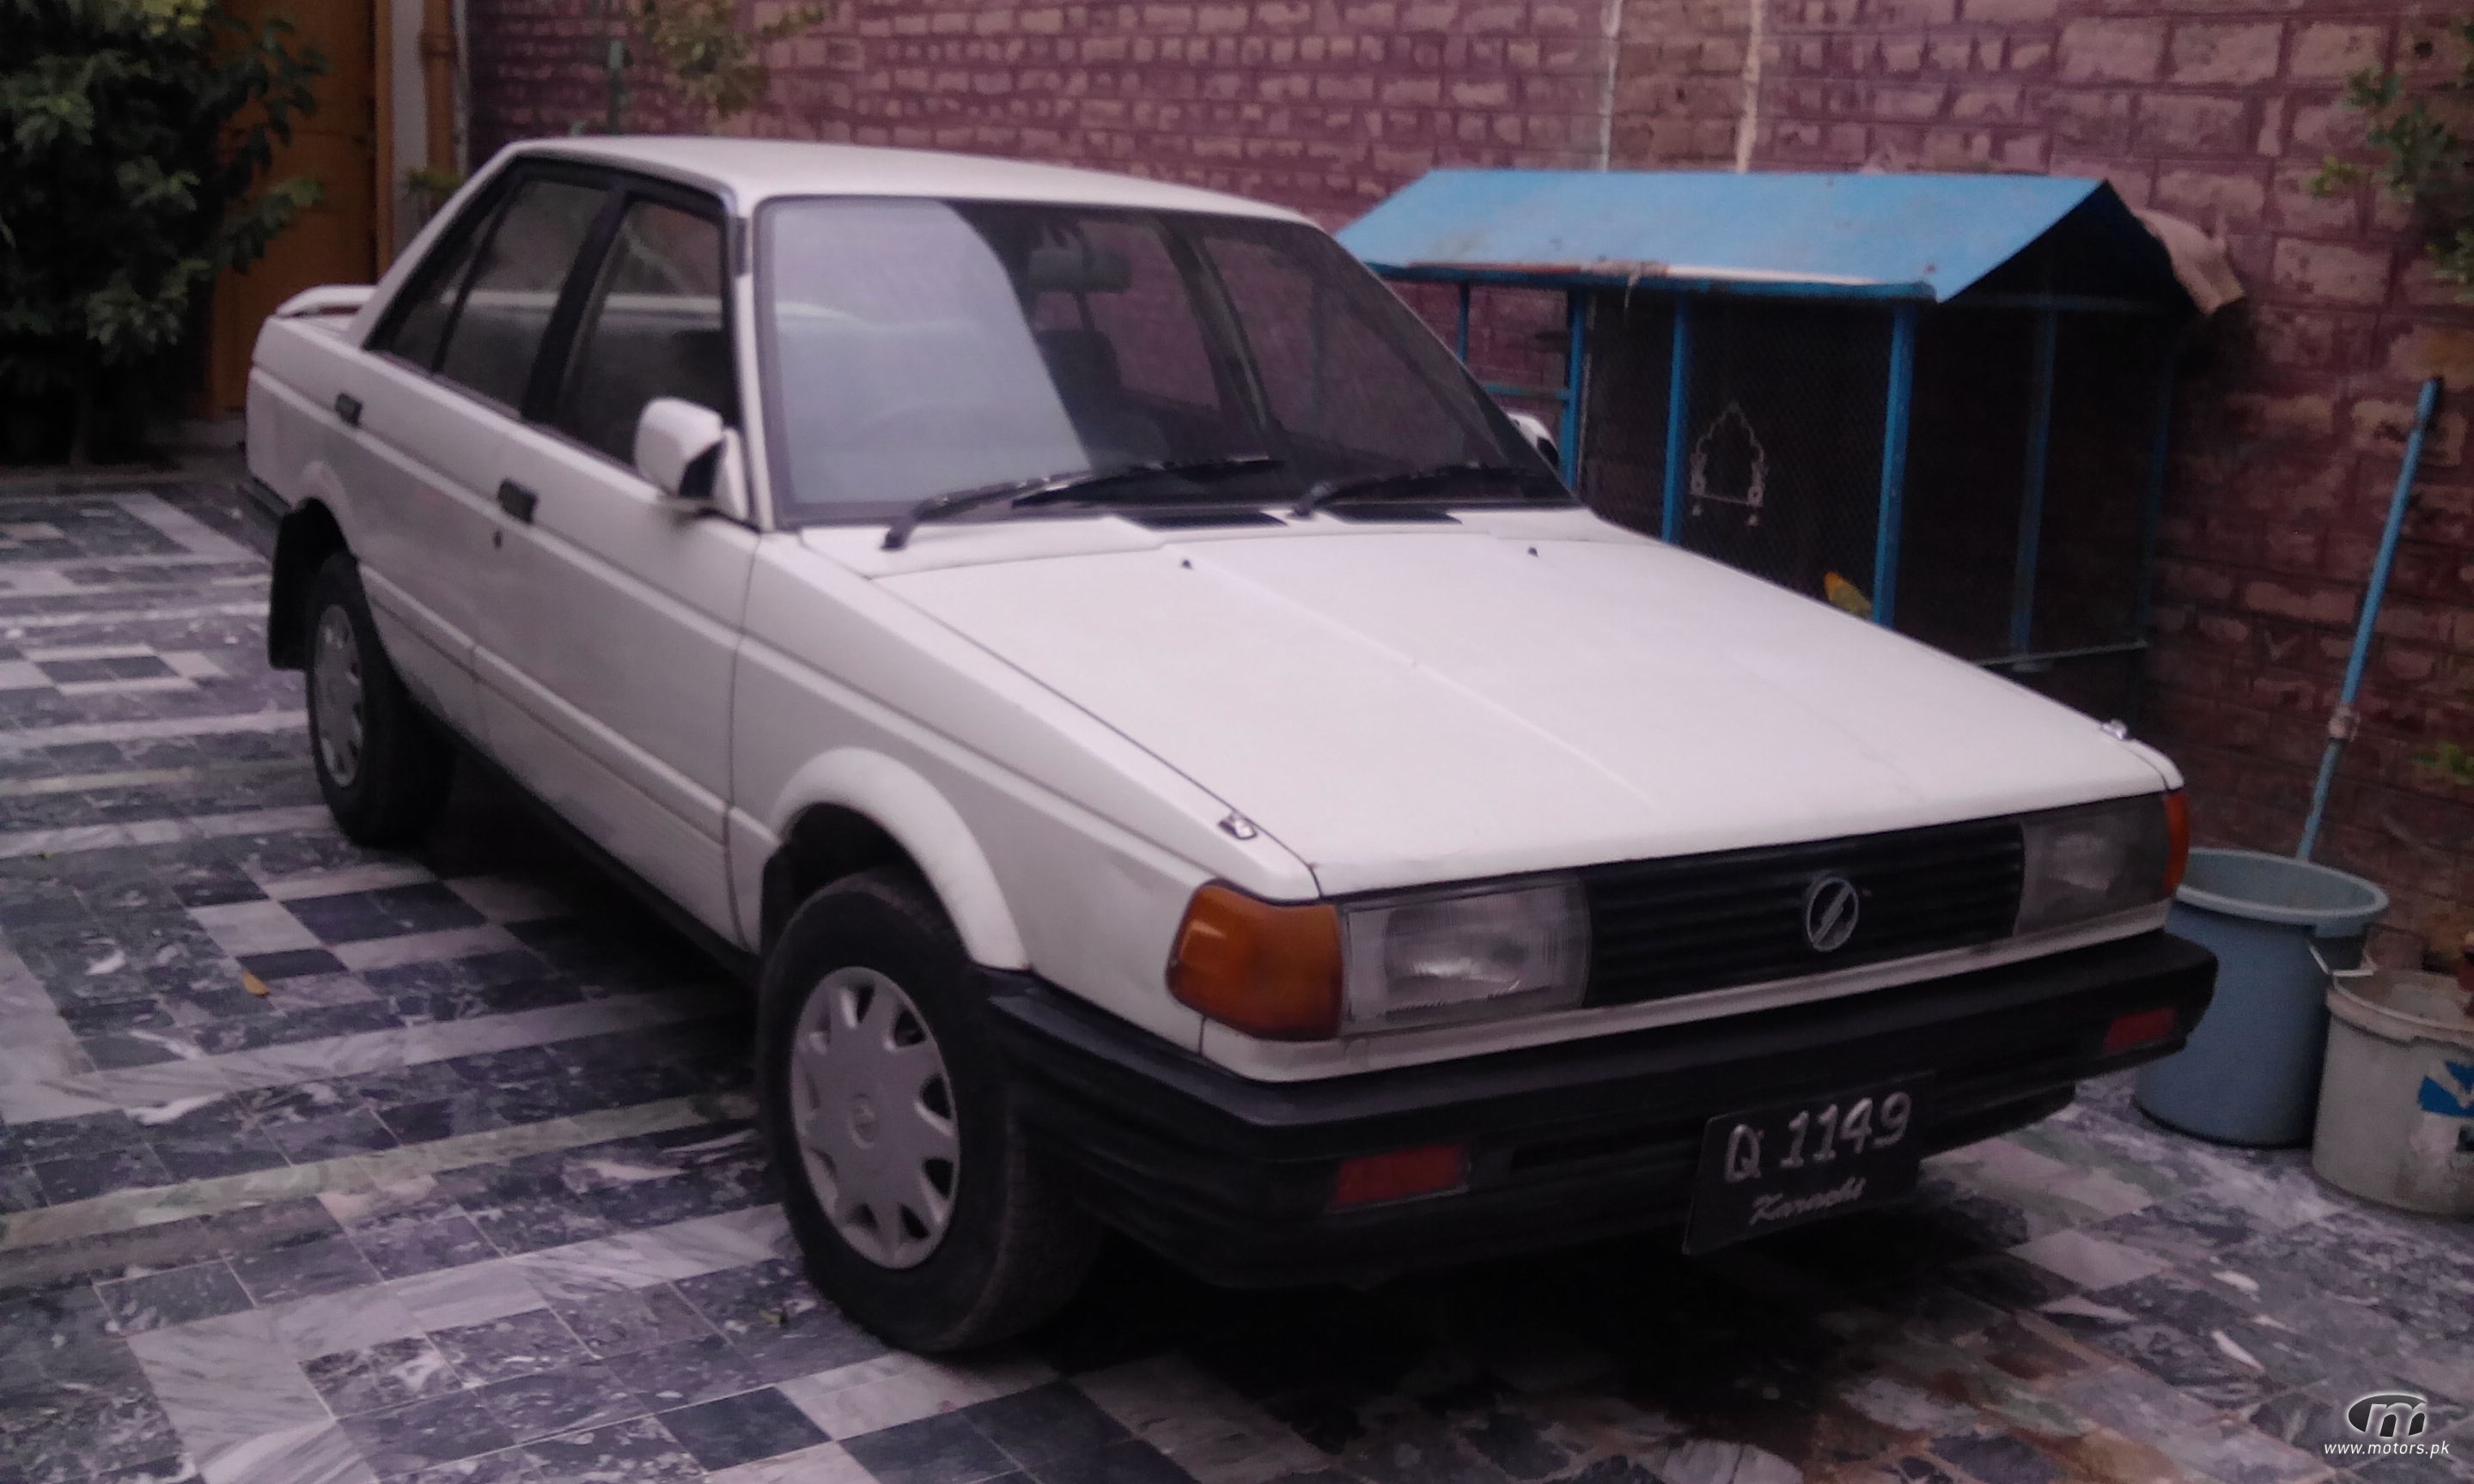 Used Nissan Sunny 1988 For Sale in Peshawer Ad: 8013 | Motors.pk